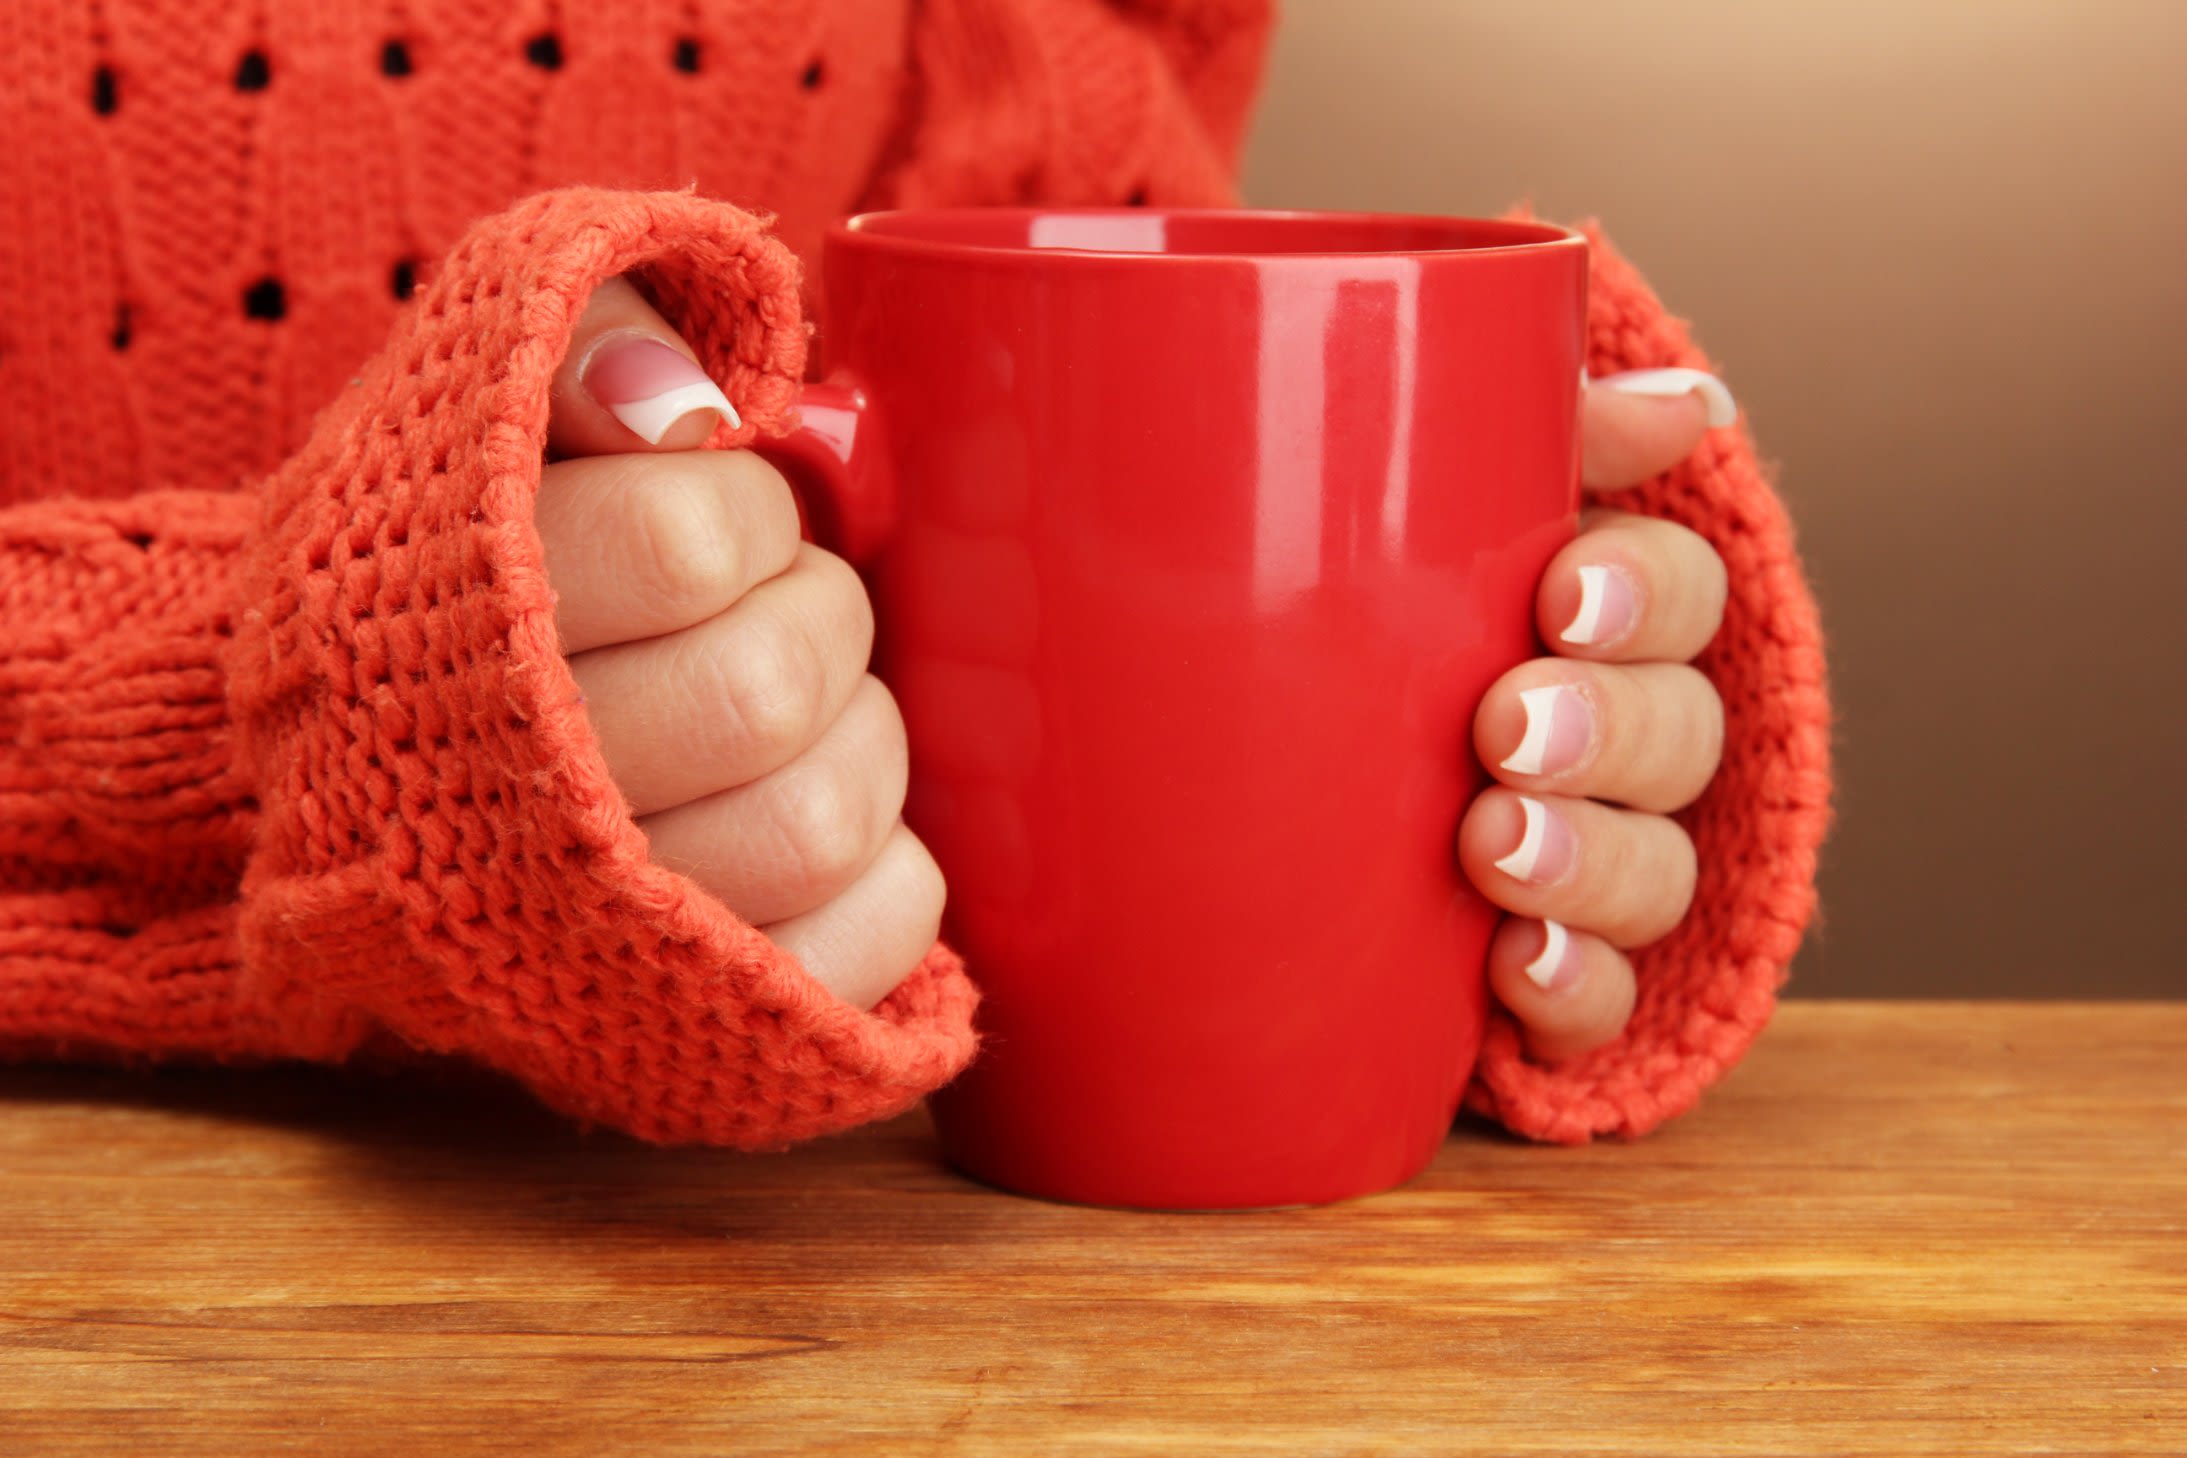 With hot coffee, we see a warm heart, Yale researchers find